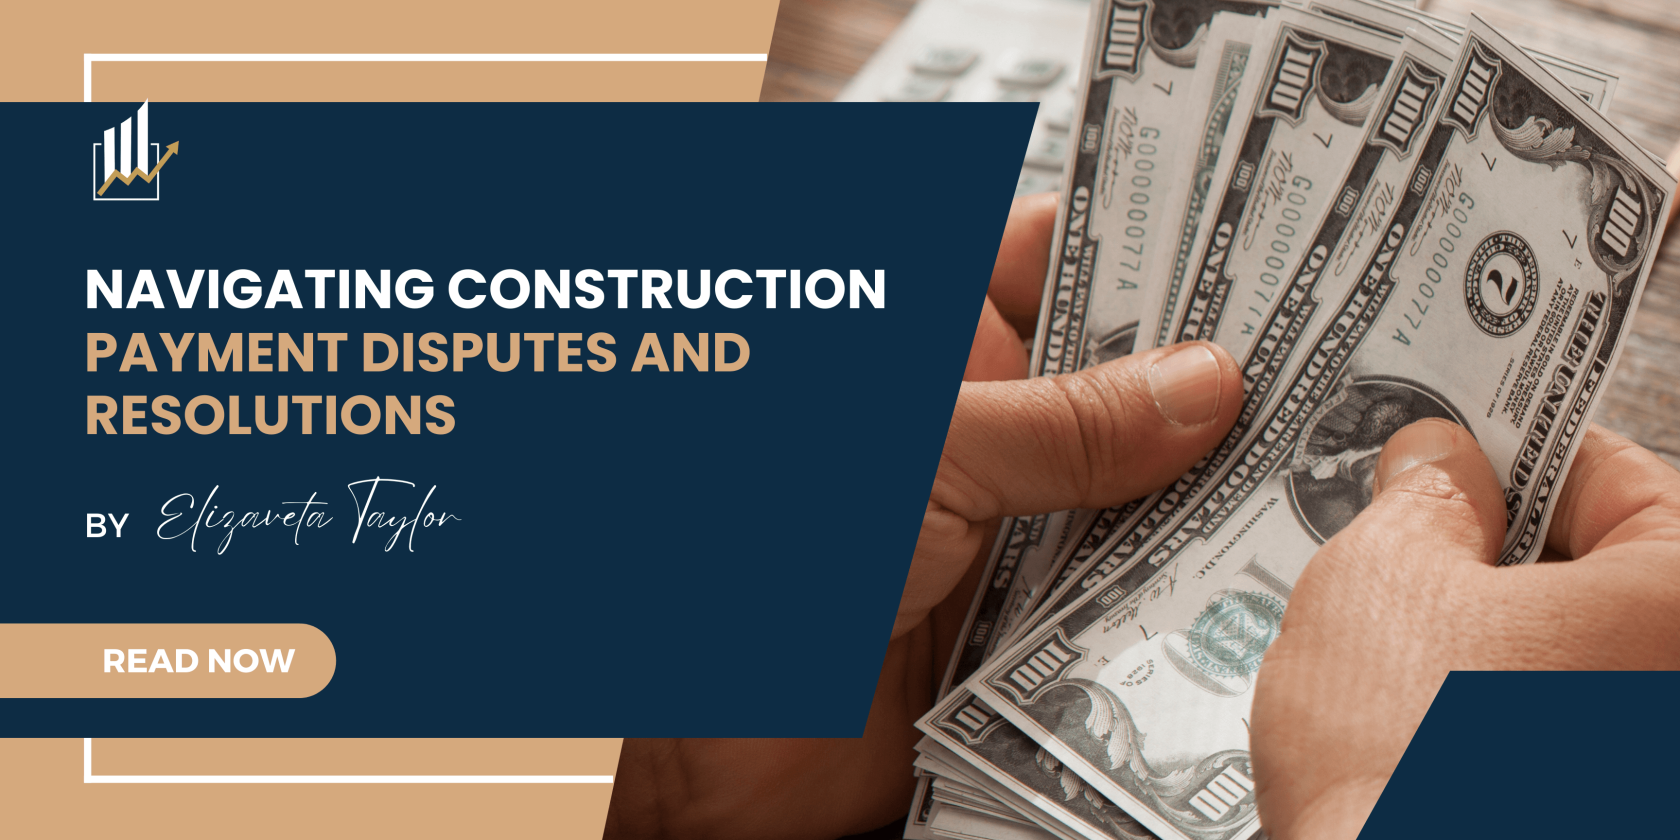 Navigating Construction Payment Disputes and Resolutions